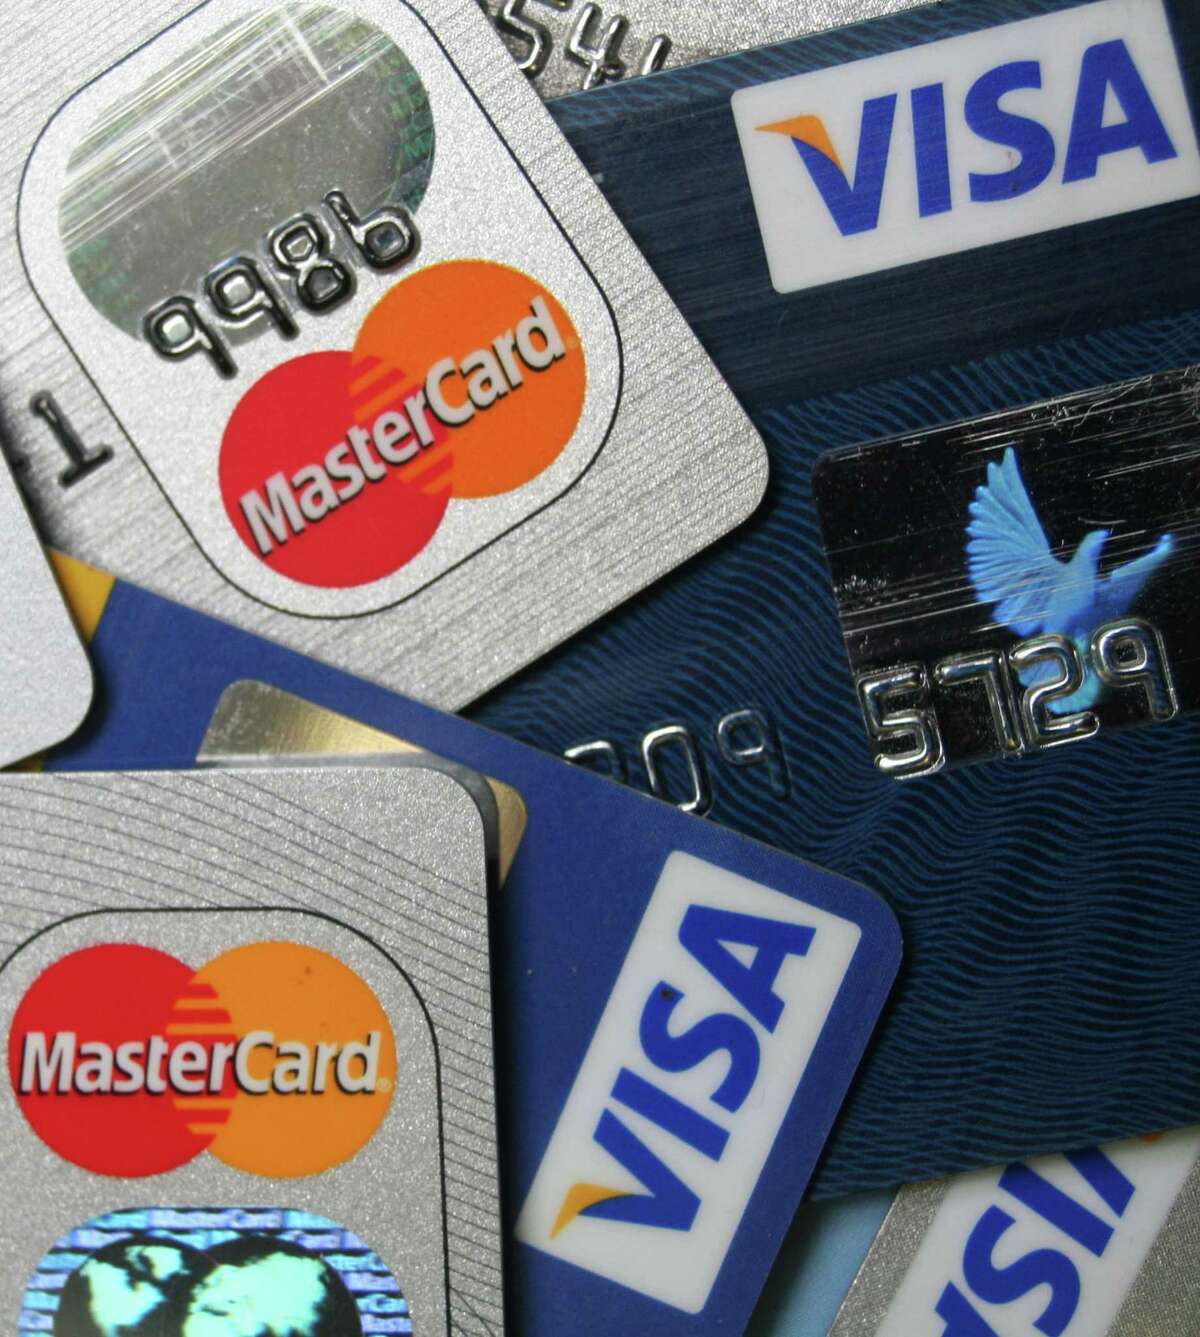 This file photo taken Nov. 18, 2009, shows a pile of MasterCard and VISA credit cards in Frankfurt, Germany. Heads are still spinning over credit card bills and charges. A law that went into effect in February 2010, requires banks to provide numerous consumer protections, including clearer monthly statements. Yet confusion about some practices remains widespread. (AP Photo/Jochen Krause, File)